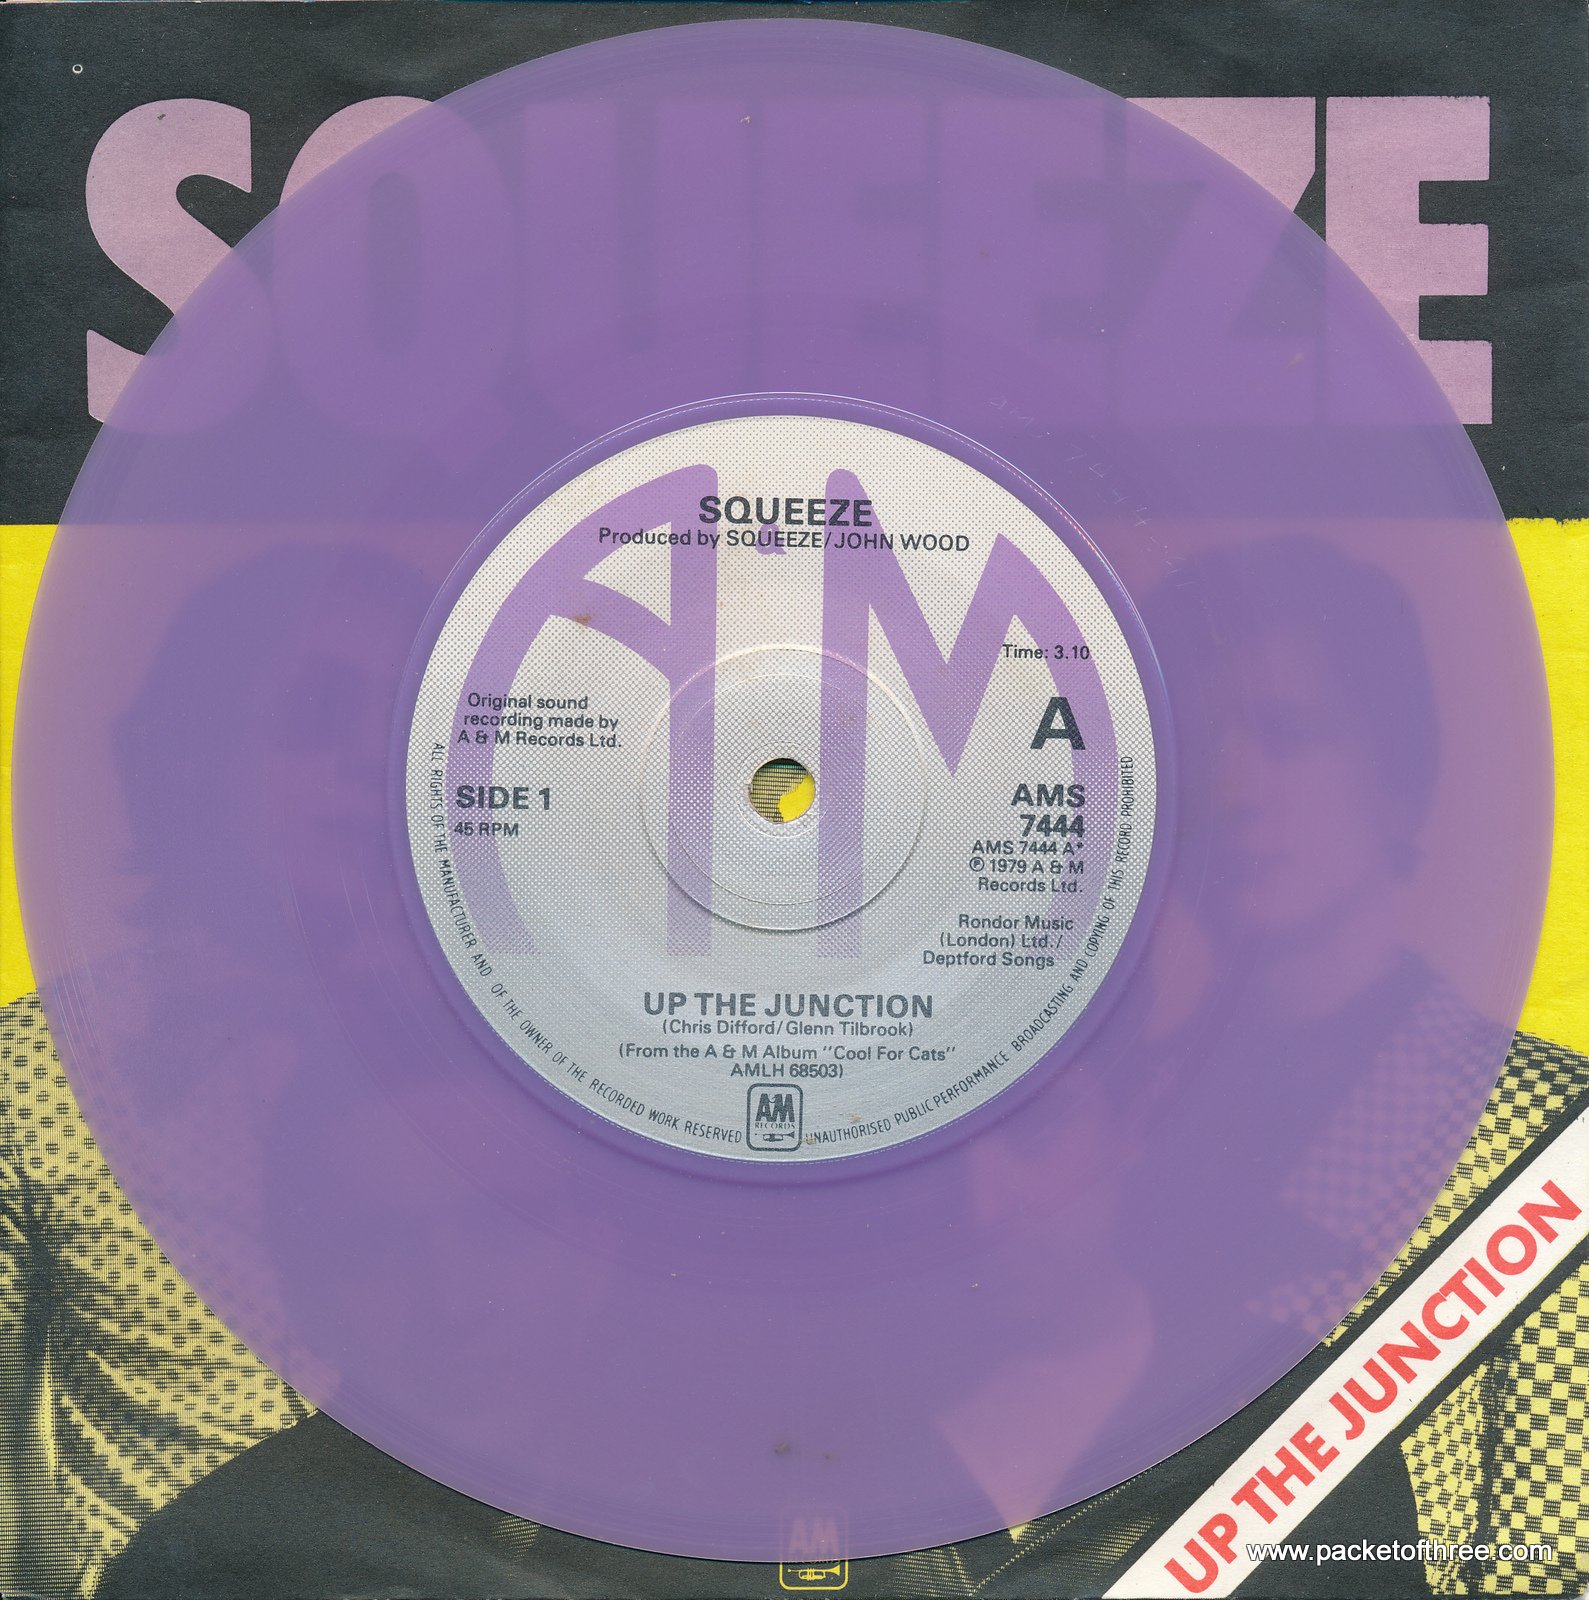 Up the Junction - UK - 7" - picture sleeve - lilac vinyl